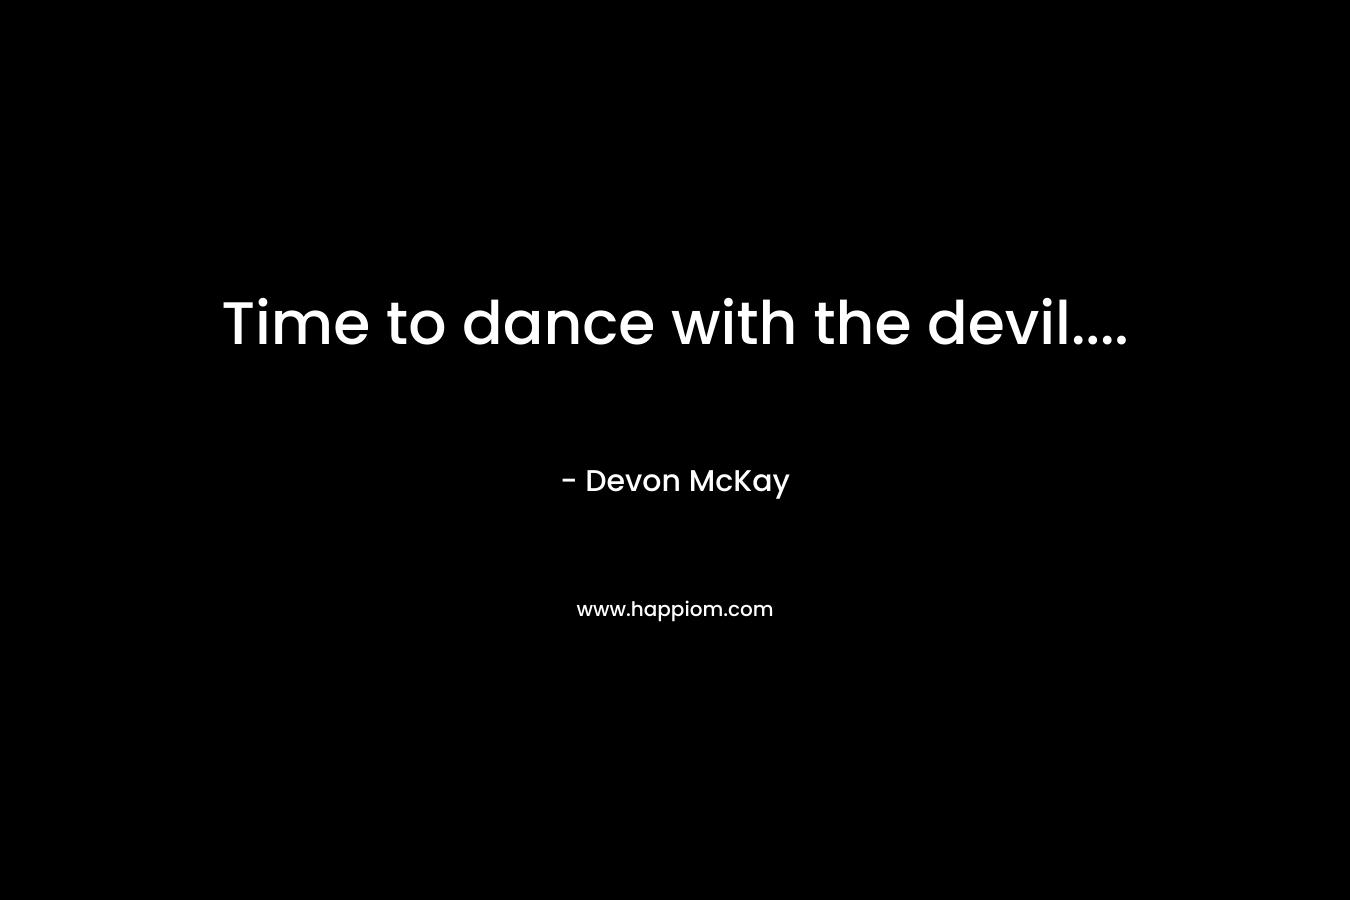 Time to dance with the devil....